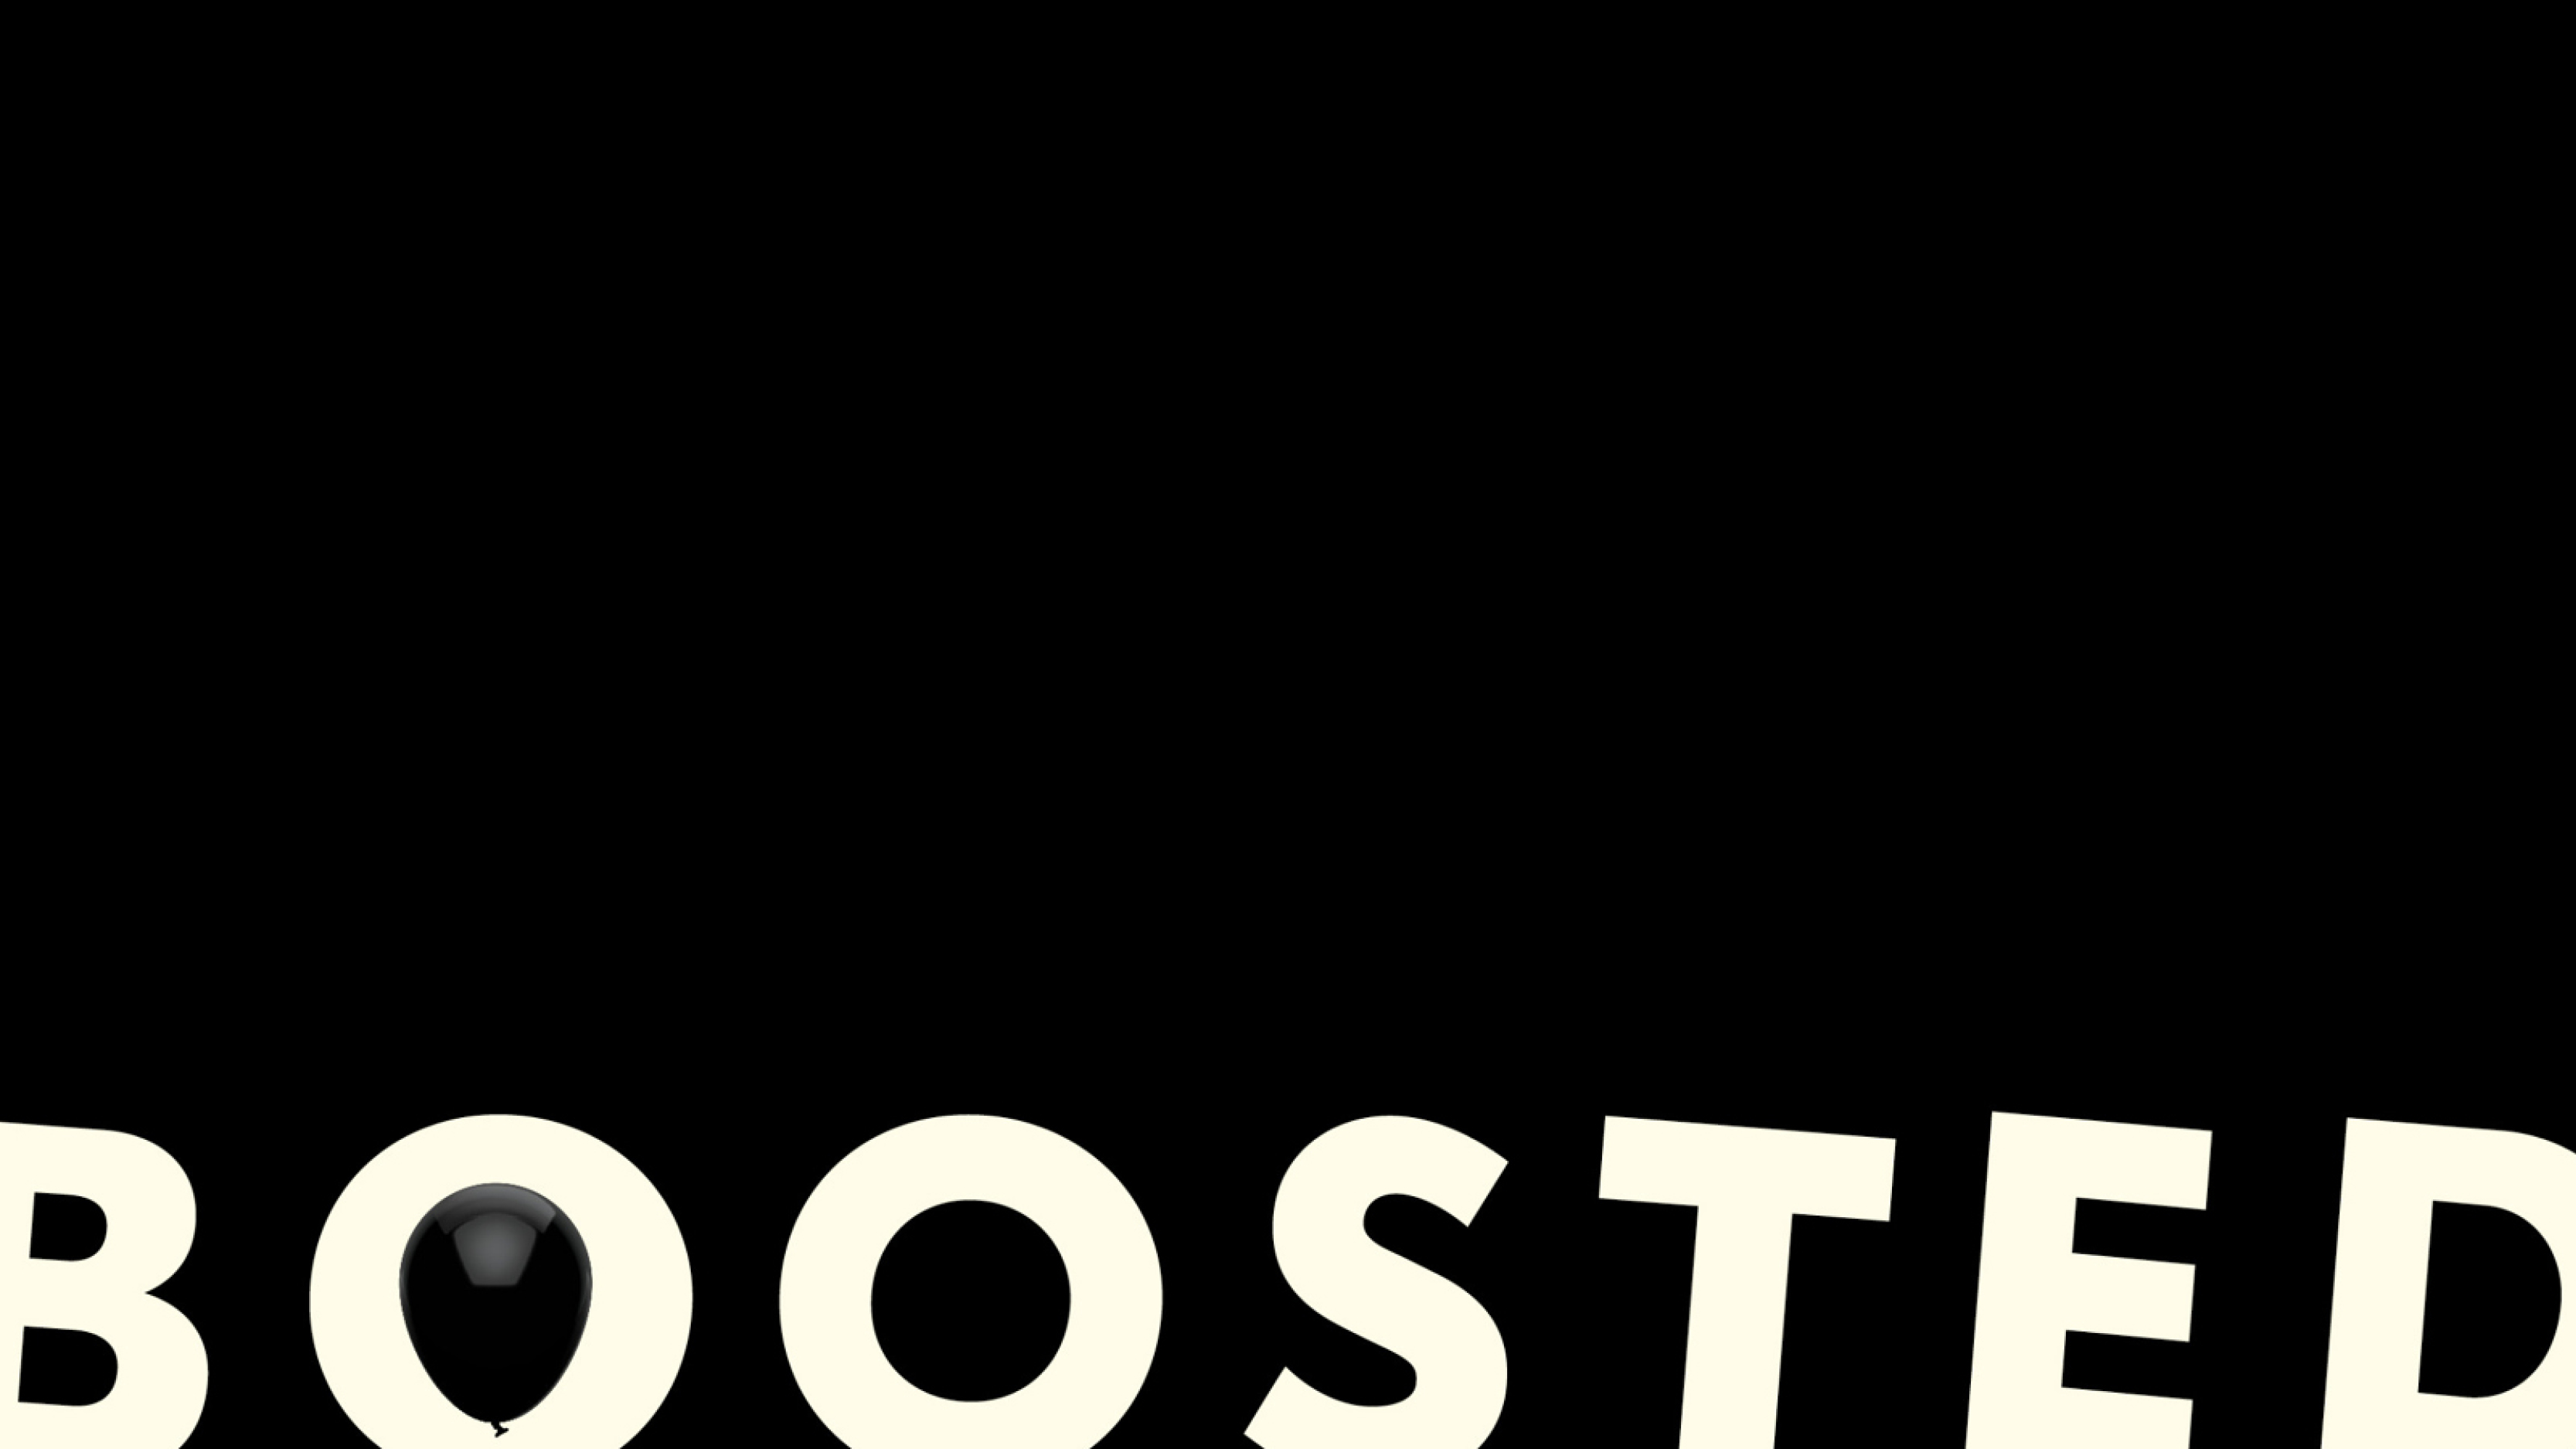 Boosted wordmark with baloon motif